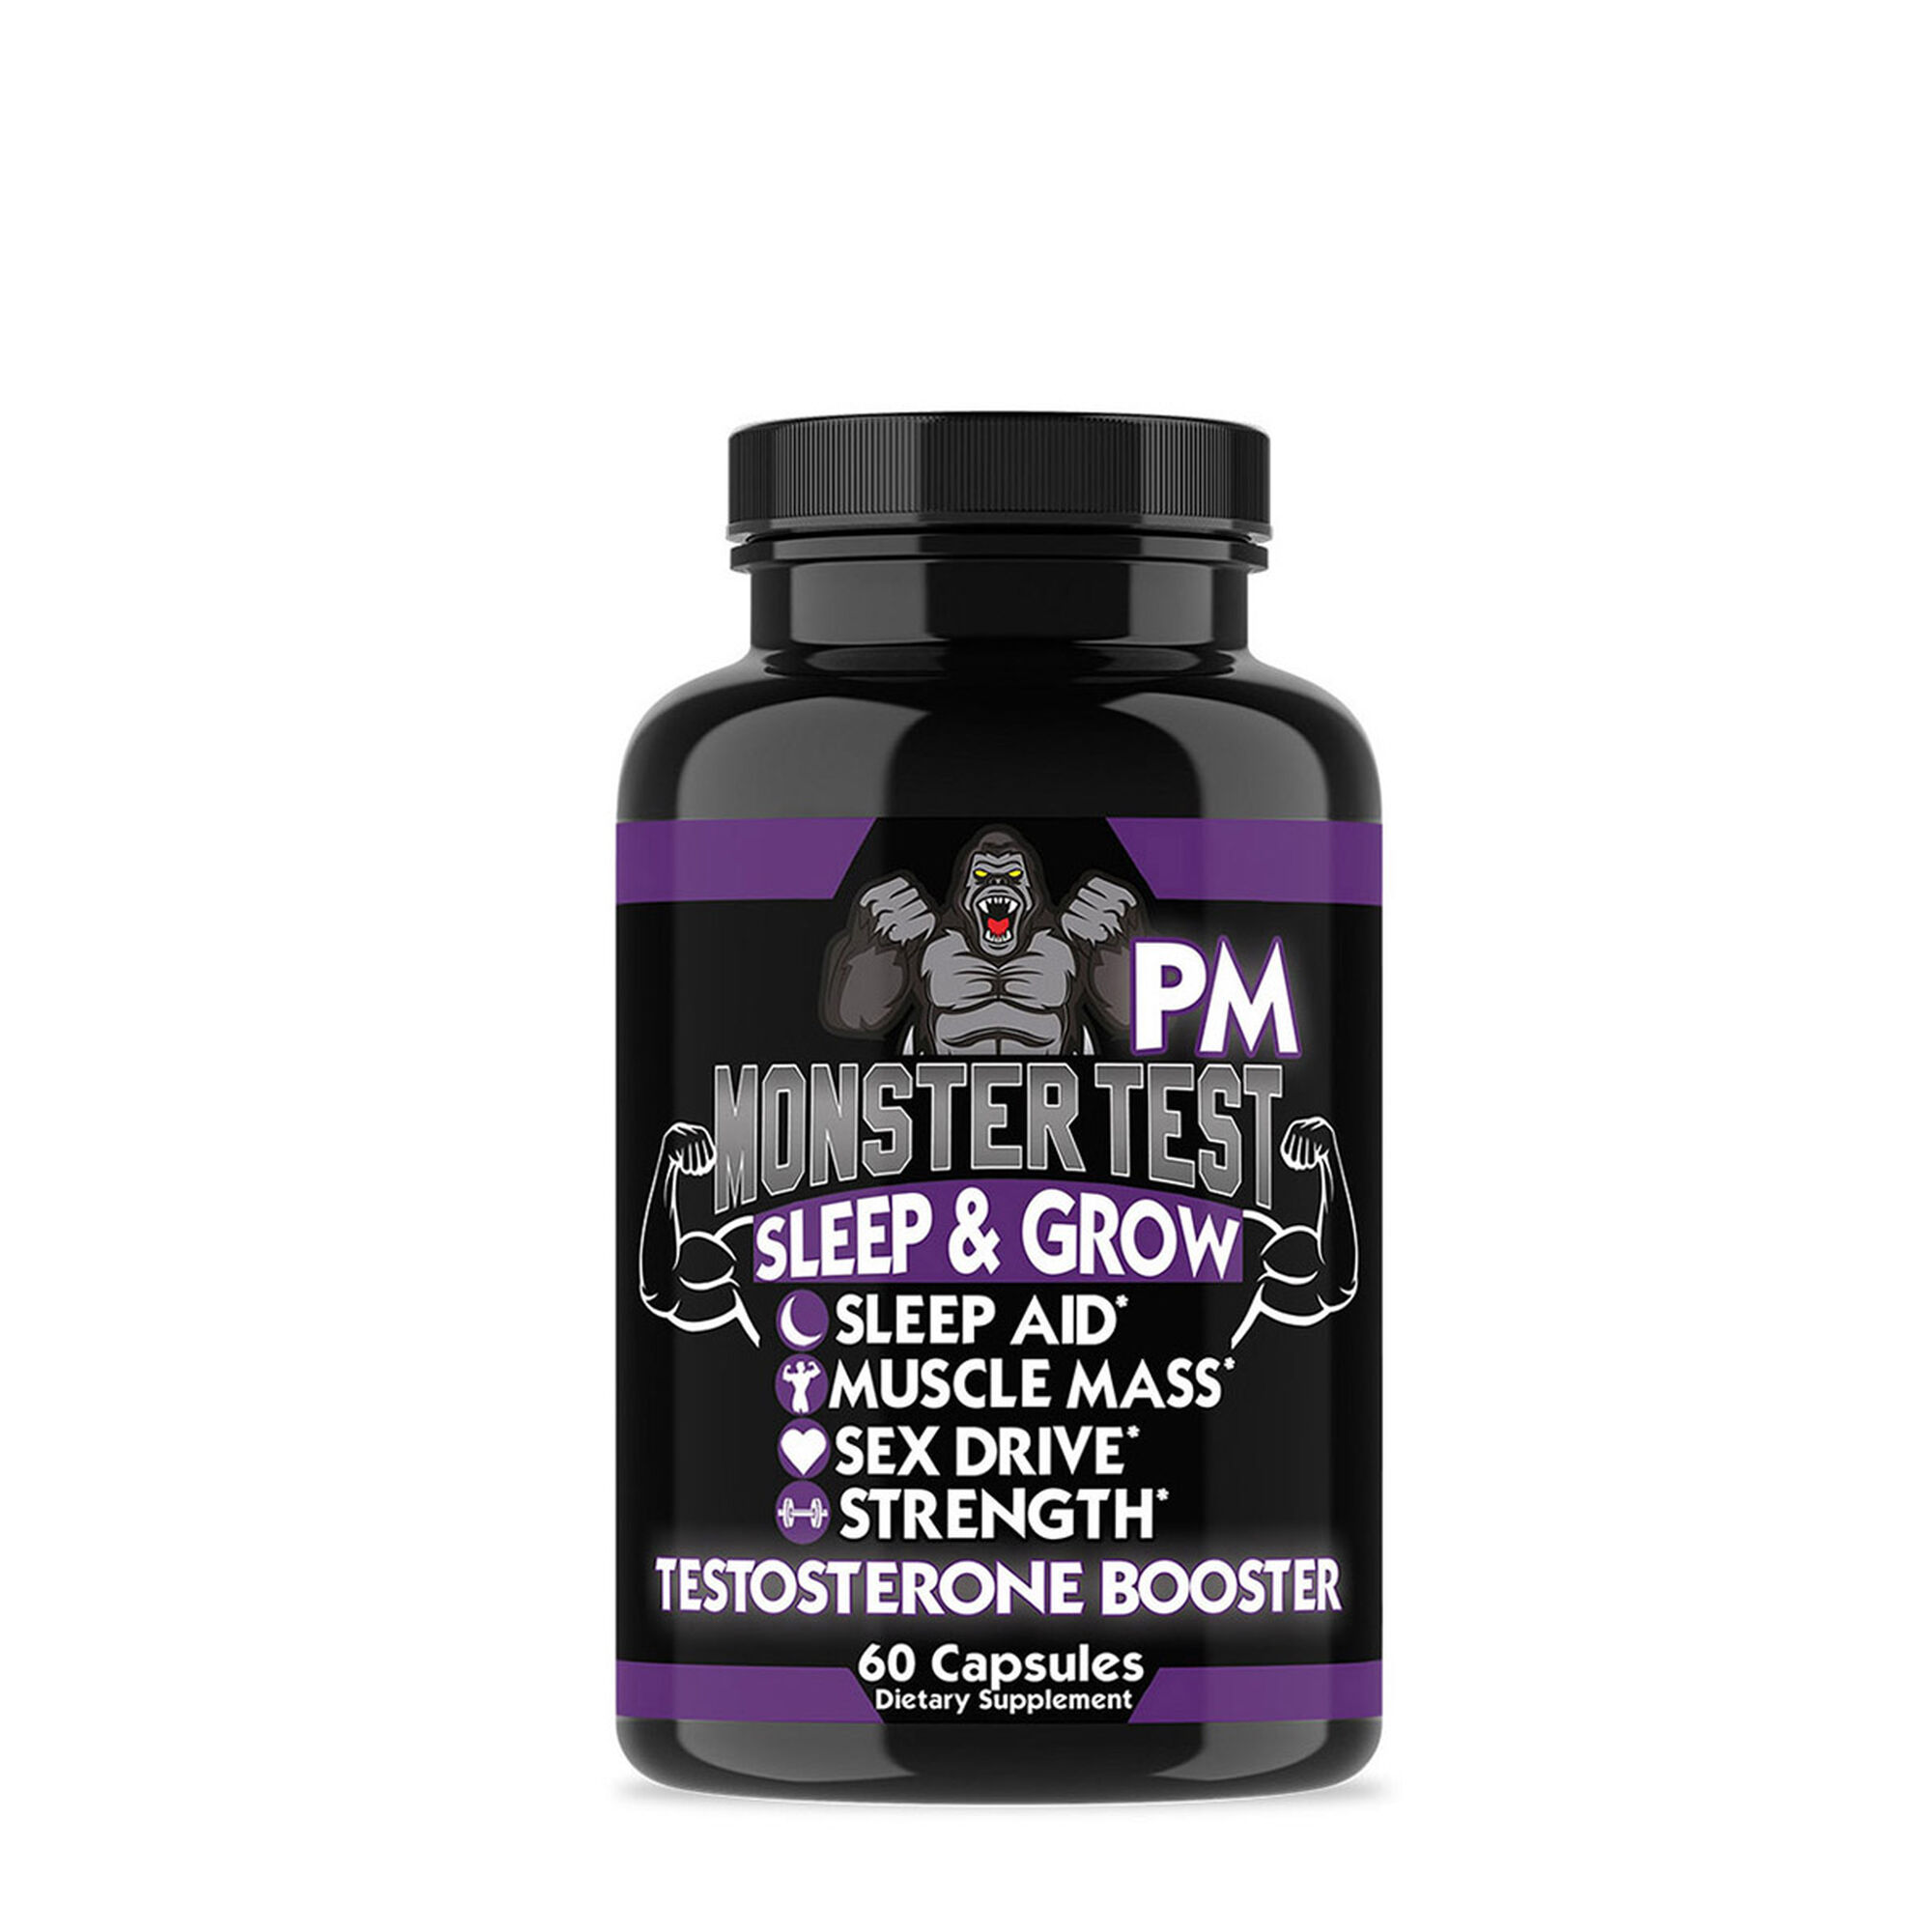 Monster Test Pm Testosterone Booster Side Effects